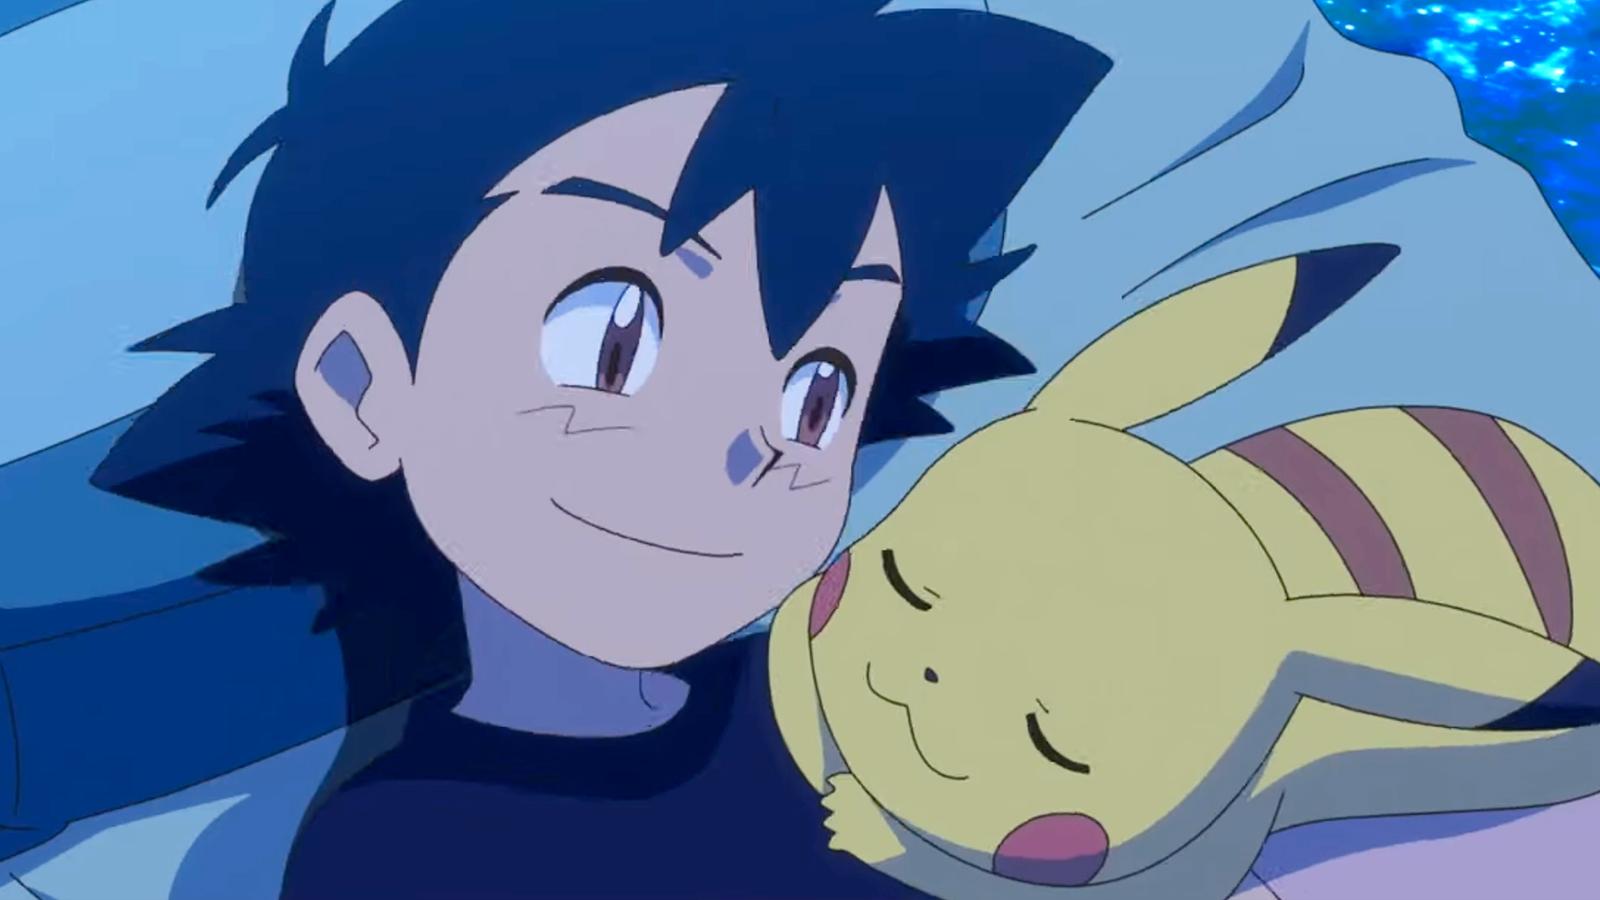 New 'Pokémon' Anime Trailer Confirms Upcoming Series to Include